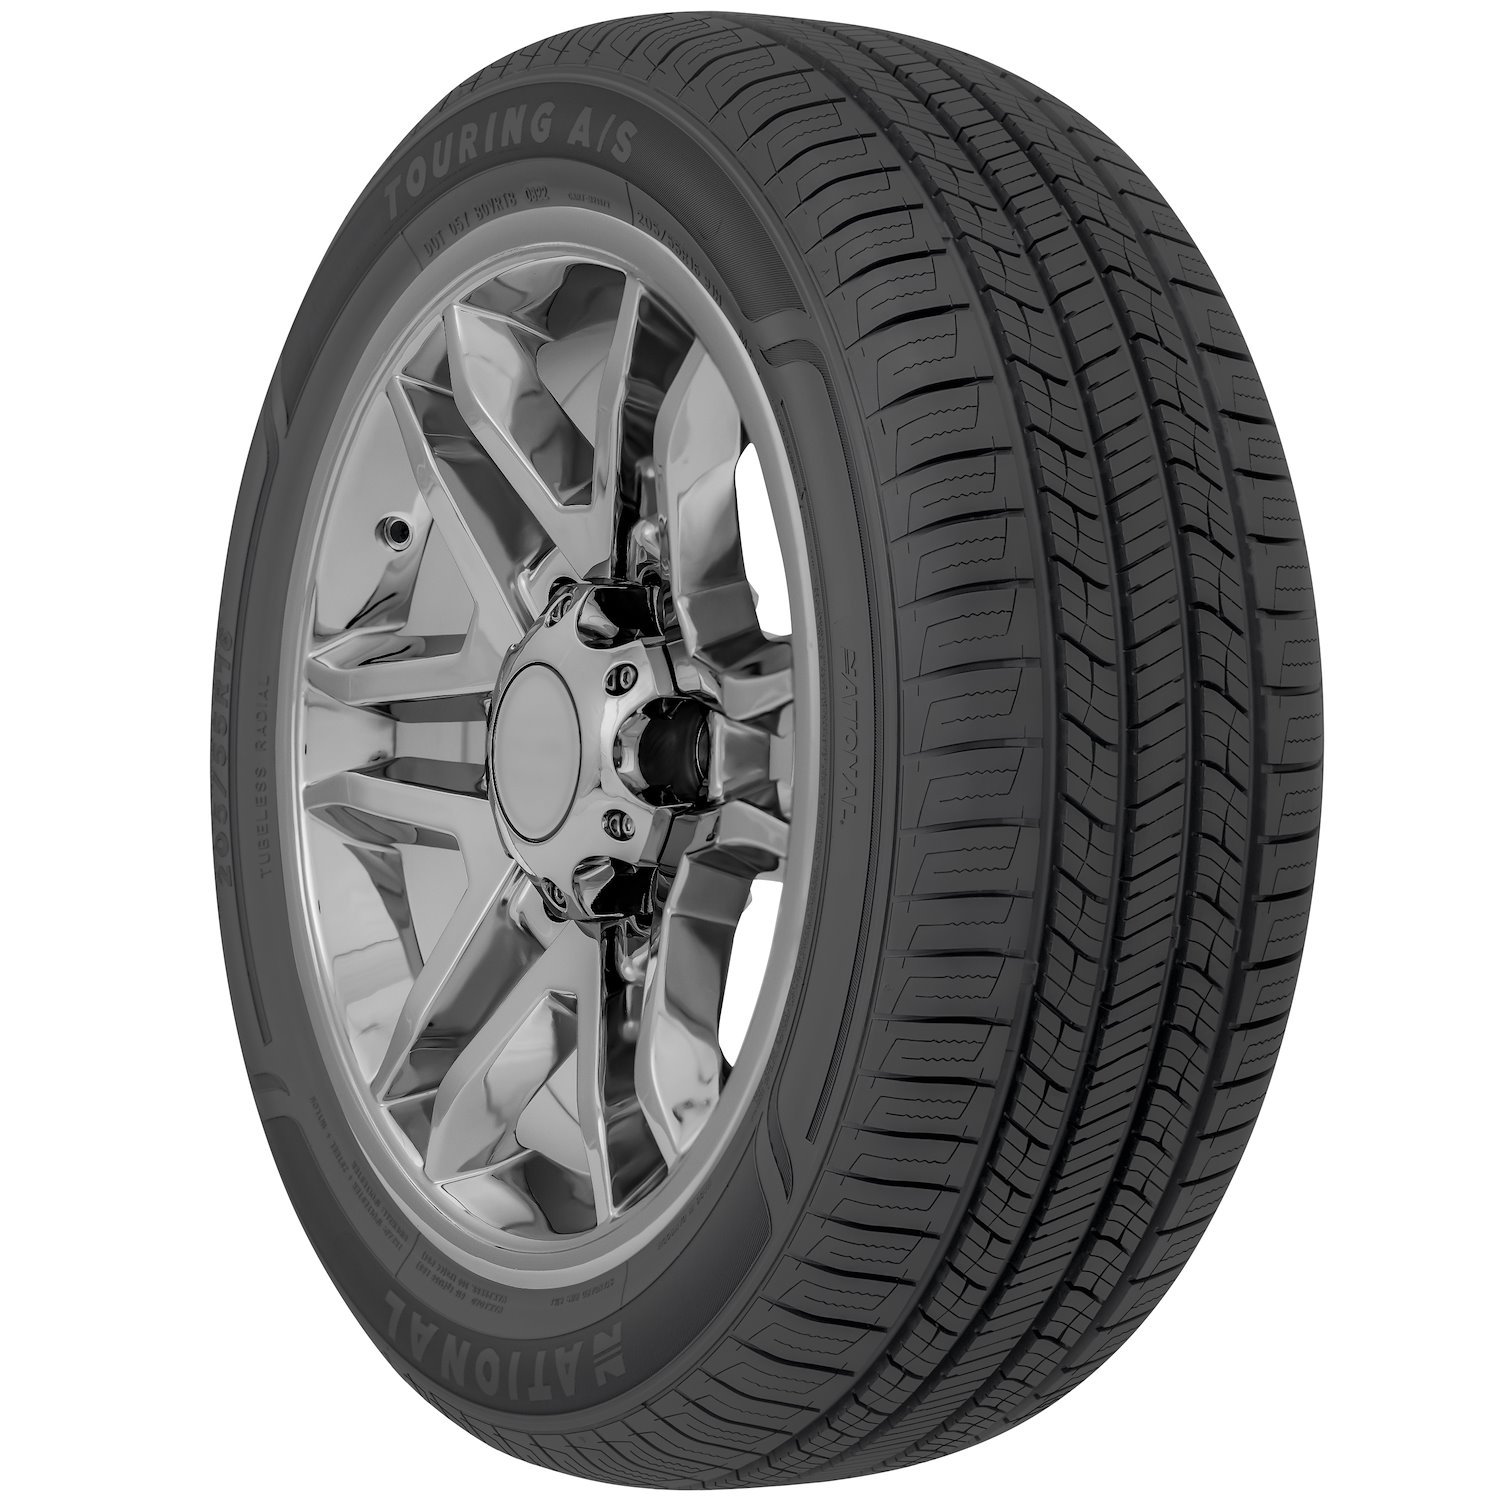 NLR88 Touring A/S Tire, 225/55R17